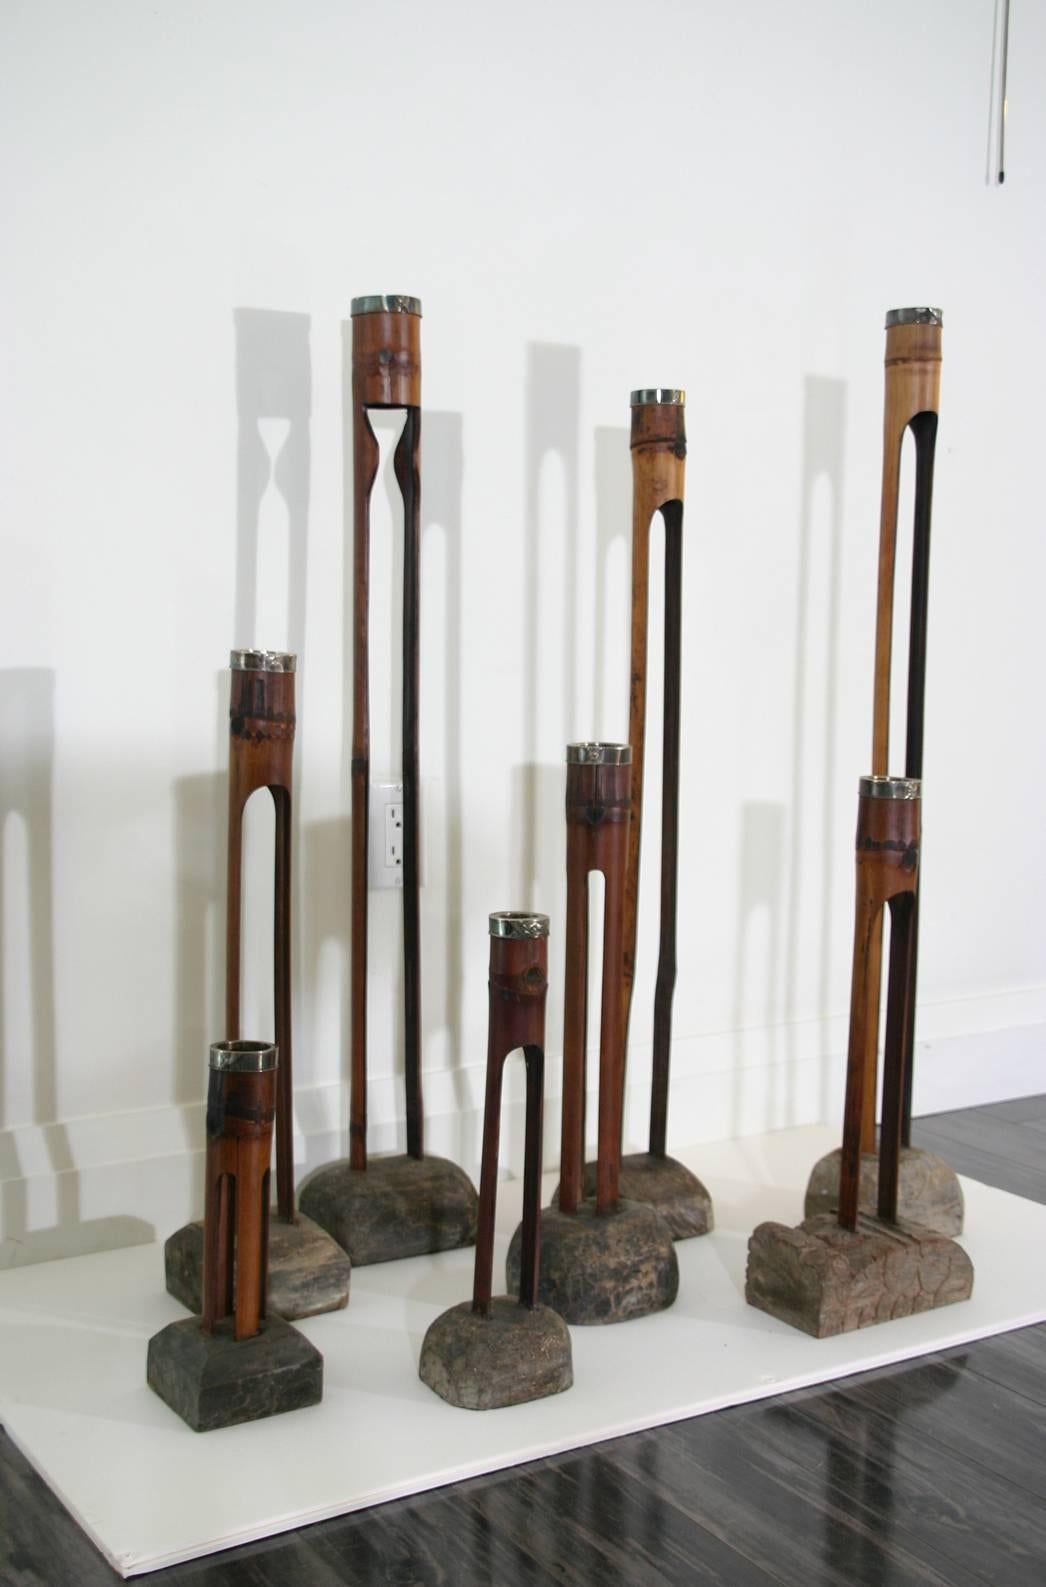 Eight late 19th century Indonesian silver mounted bamboo candlesticks on carved and shaped bases. Various sizes and carved bases. Individually priced. Price and measurements for each individual stick are:

36.25